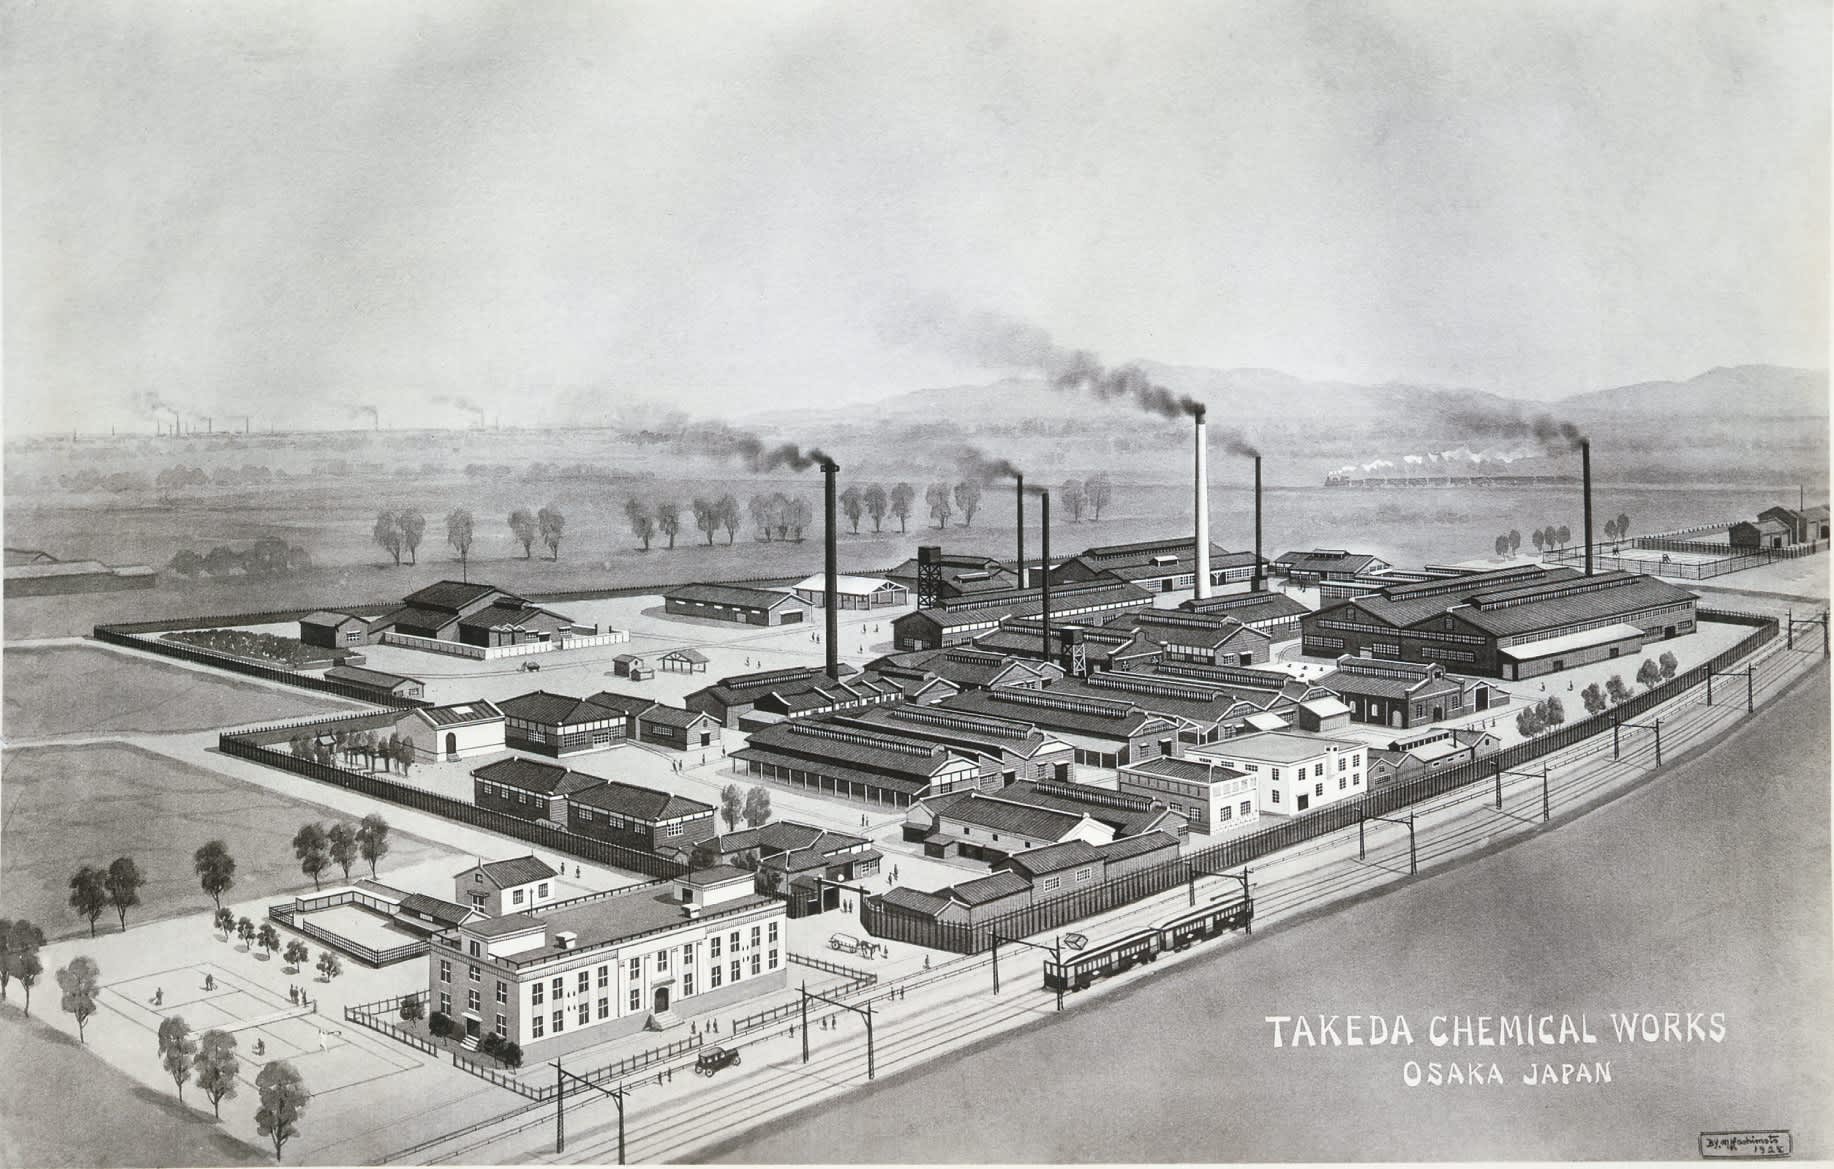 Old picture of Takeda's chemical works in Osaka, Japan